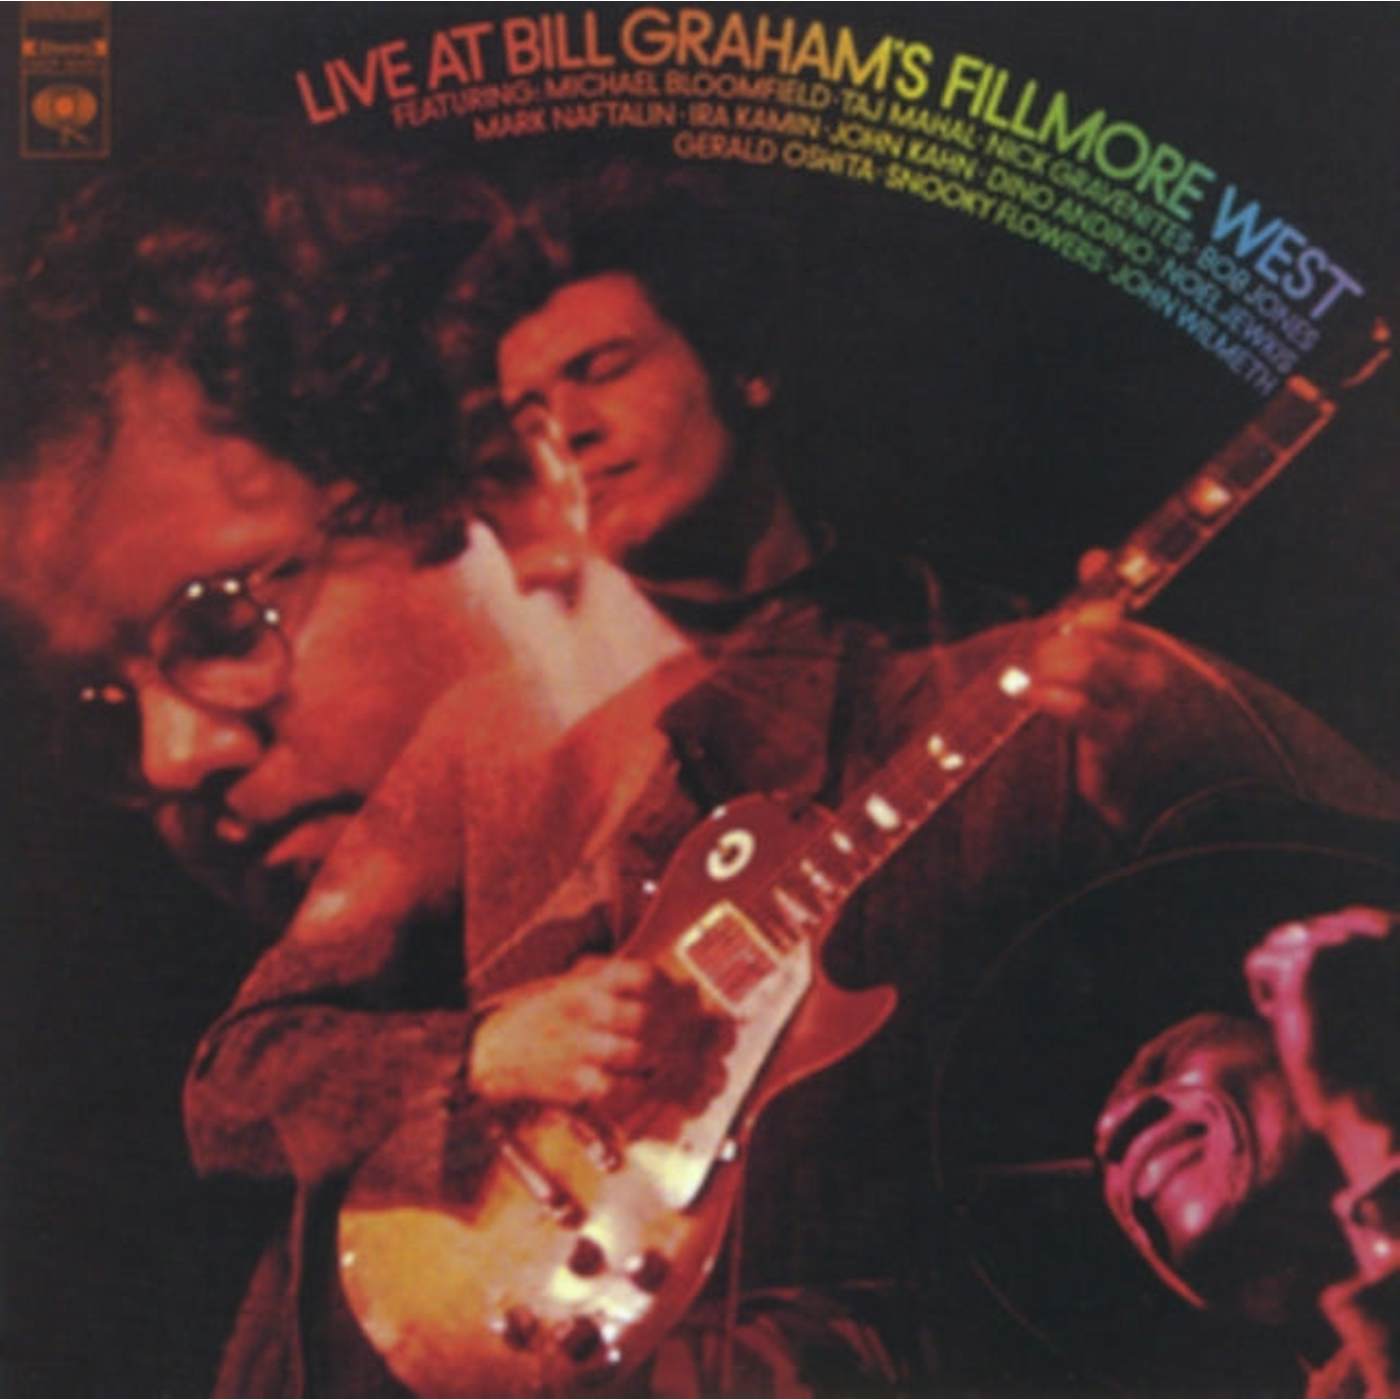 Mike Bloomfield CD - Live At Bill Graham's Fillmore West